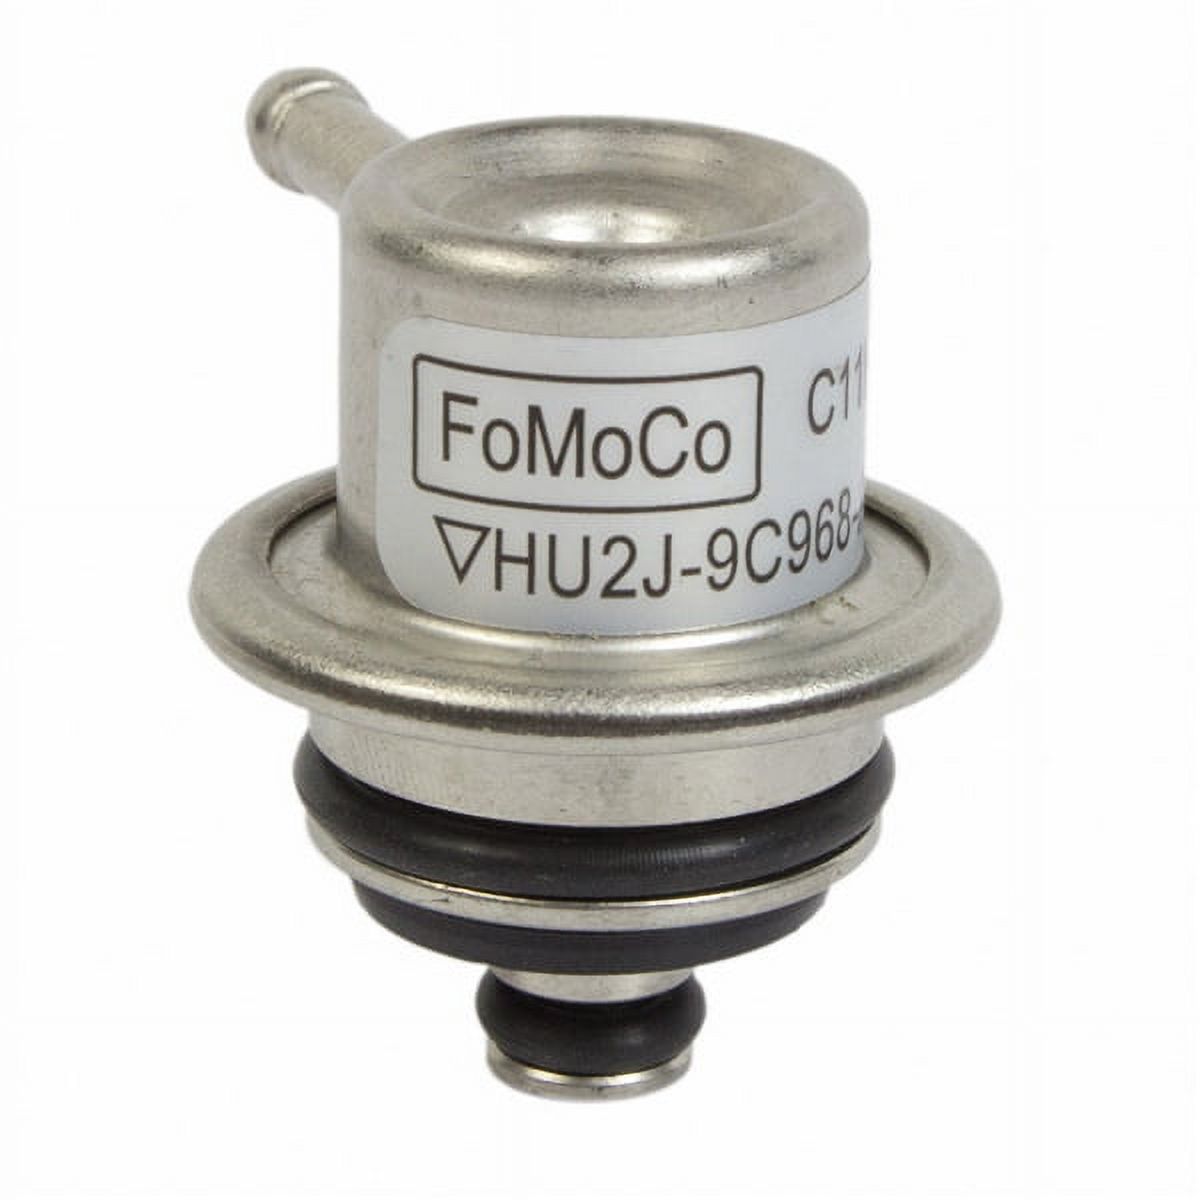 Motorcraft Fuel Injection Pressure Regulator CM-5296 Fits select: 1999-2003 FORD F150, 1999-2004 FORD F250 - image 2 of 4